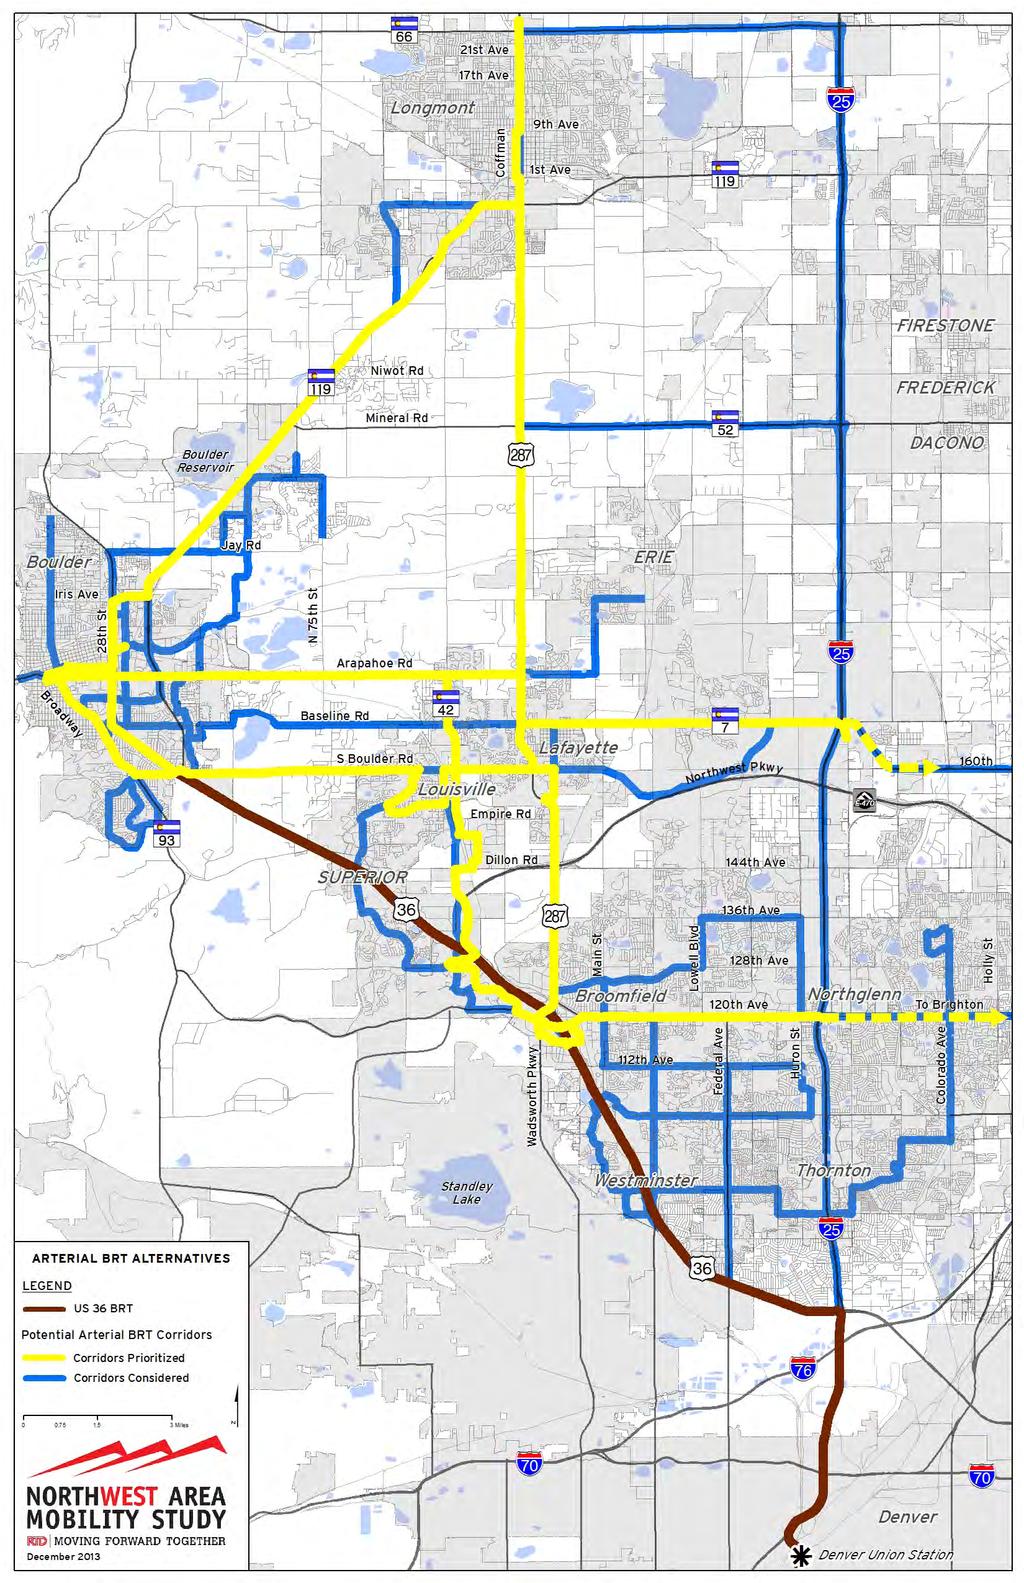 ARTERIAL BRT OVERVIEW Key Question: Could arterial Bus Rapid Transit (BRT) routes improve near-term mobility in the northwest area until rail can be built?